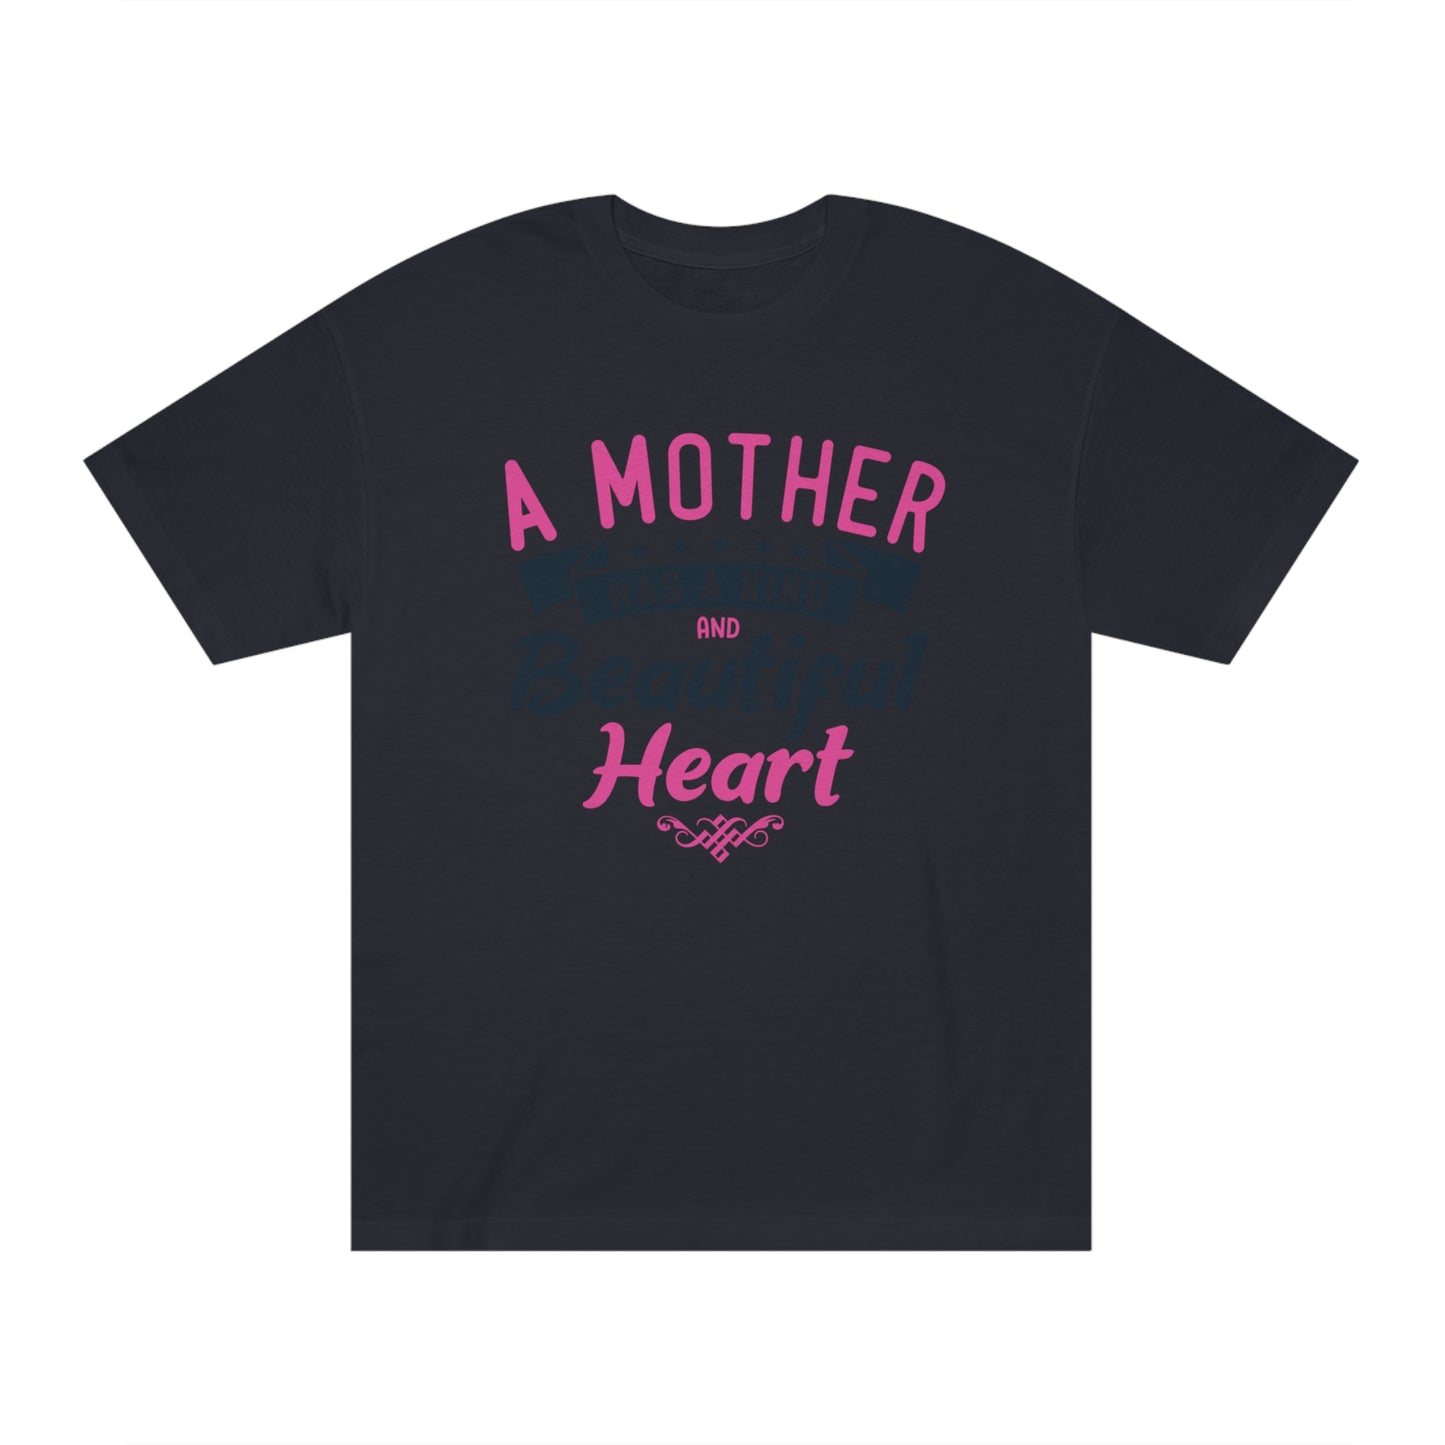 A mother has a kind and beautiful heart Unisex Classic Tee